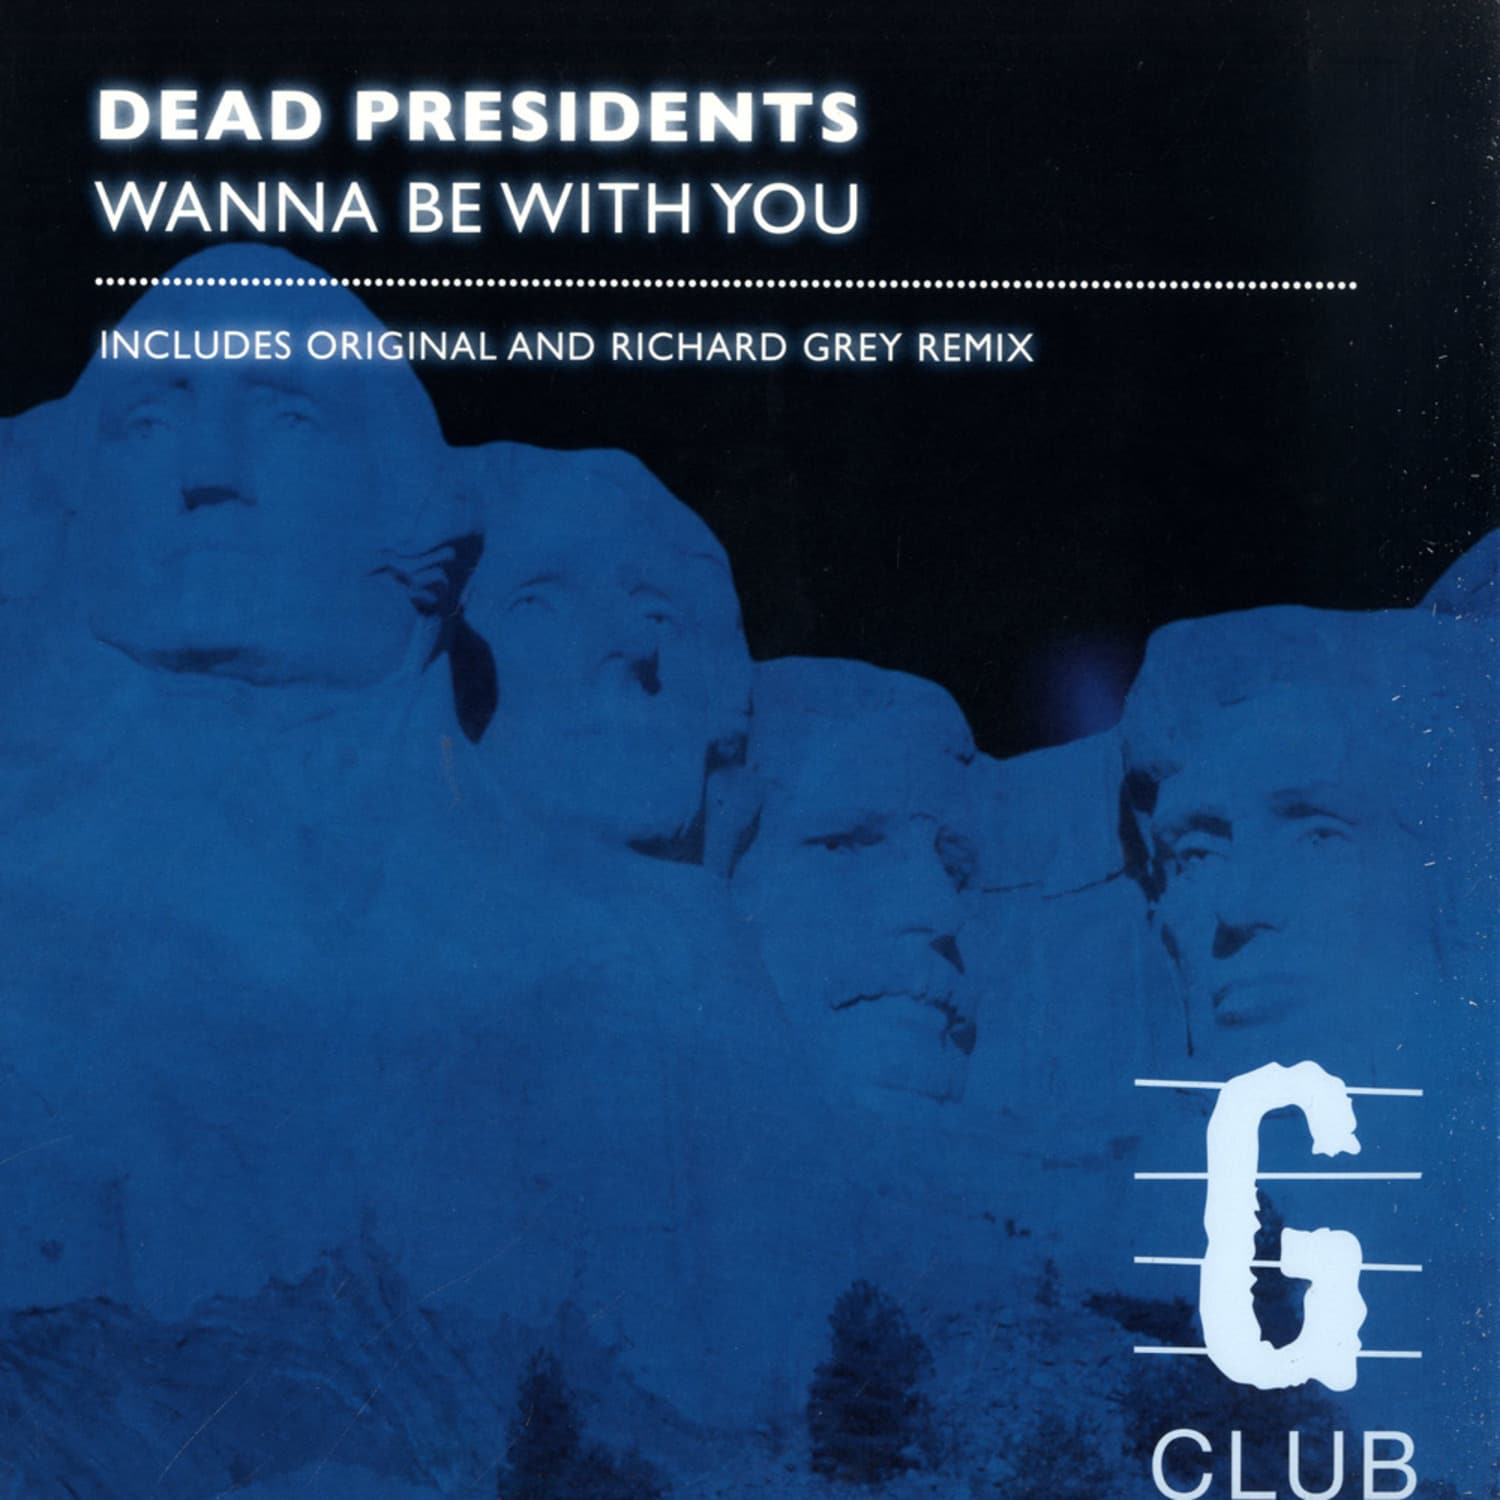 Dead Presidents - WANNA BE WITH YOU